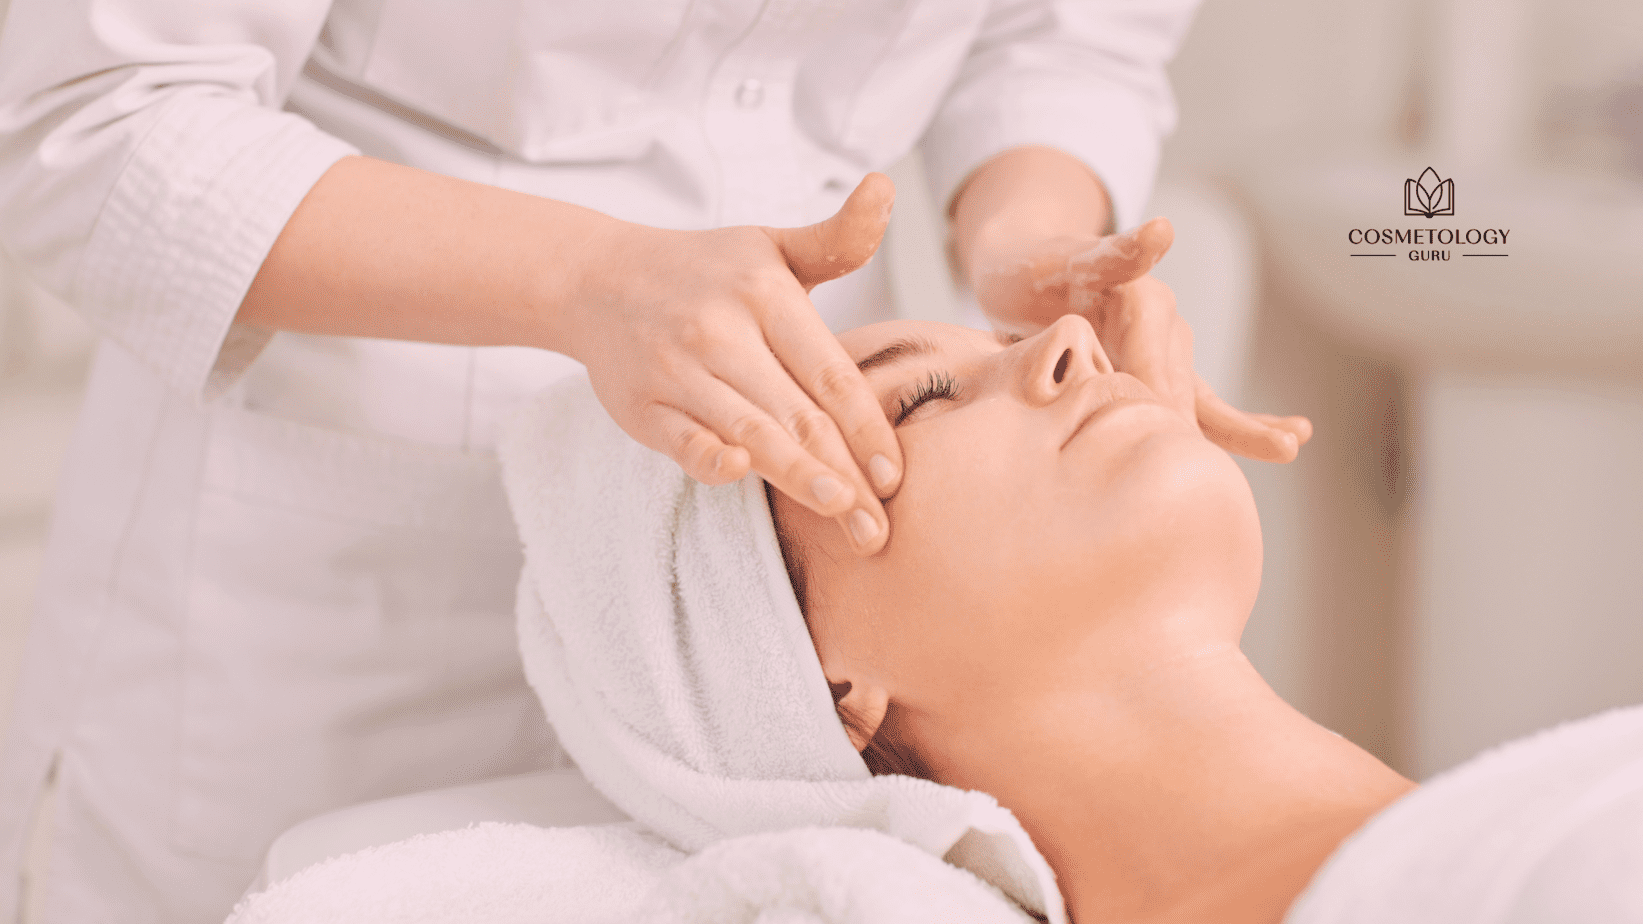 9 Highest Paying Medical Esthetician Jobs in 2022